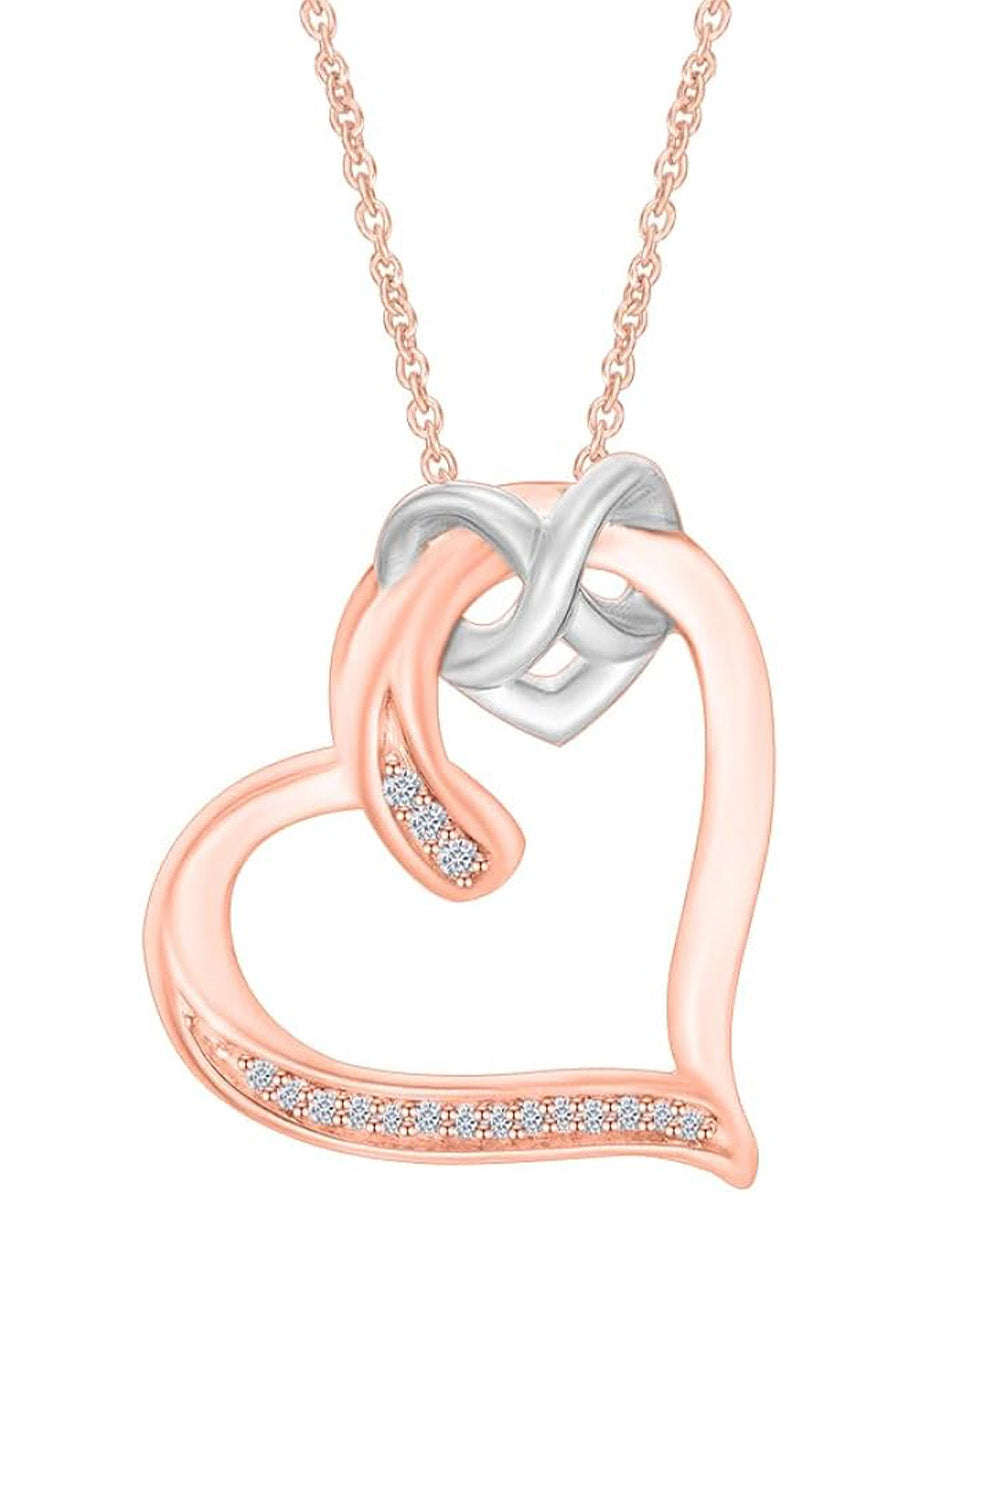 Rose Gold Color Interlocking Infinity Love Heart Pendant Necklace 